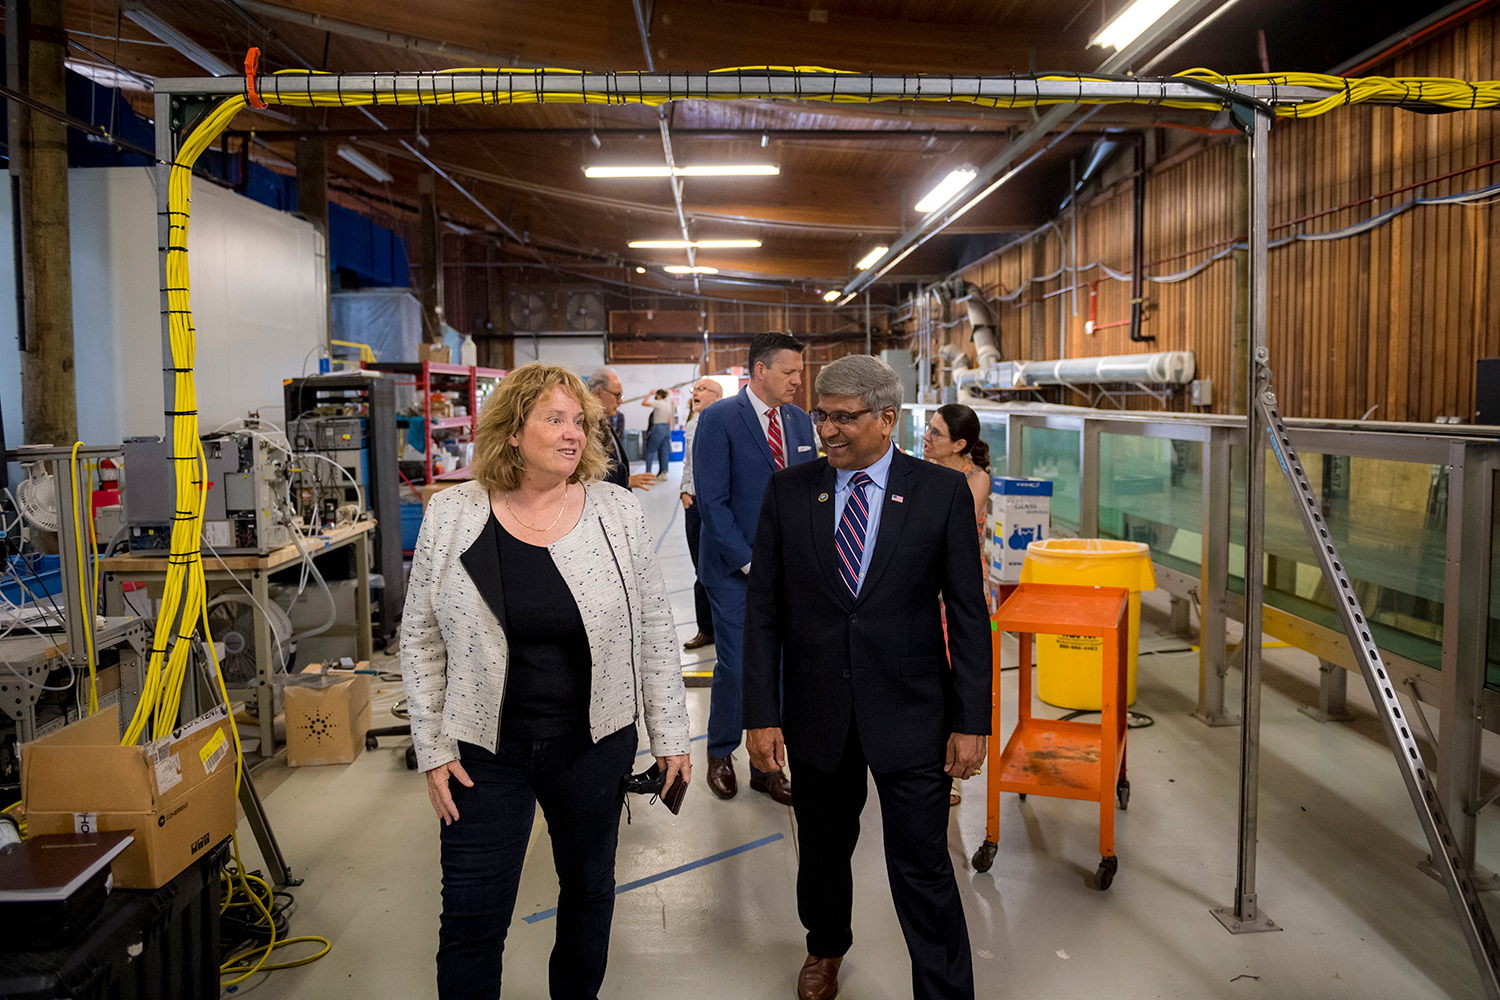 Professor Kimberly Prather with National Science Foundation Director Sethuraman Panchanathan during a tour of the Maker Space in Scripps Institution of Oceanography’s Hydraulics Laboratory.